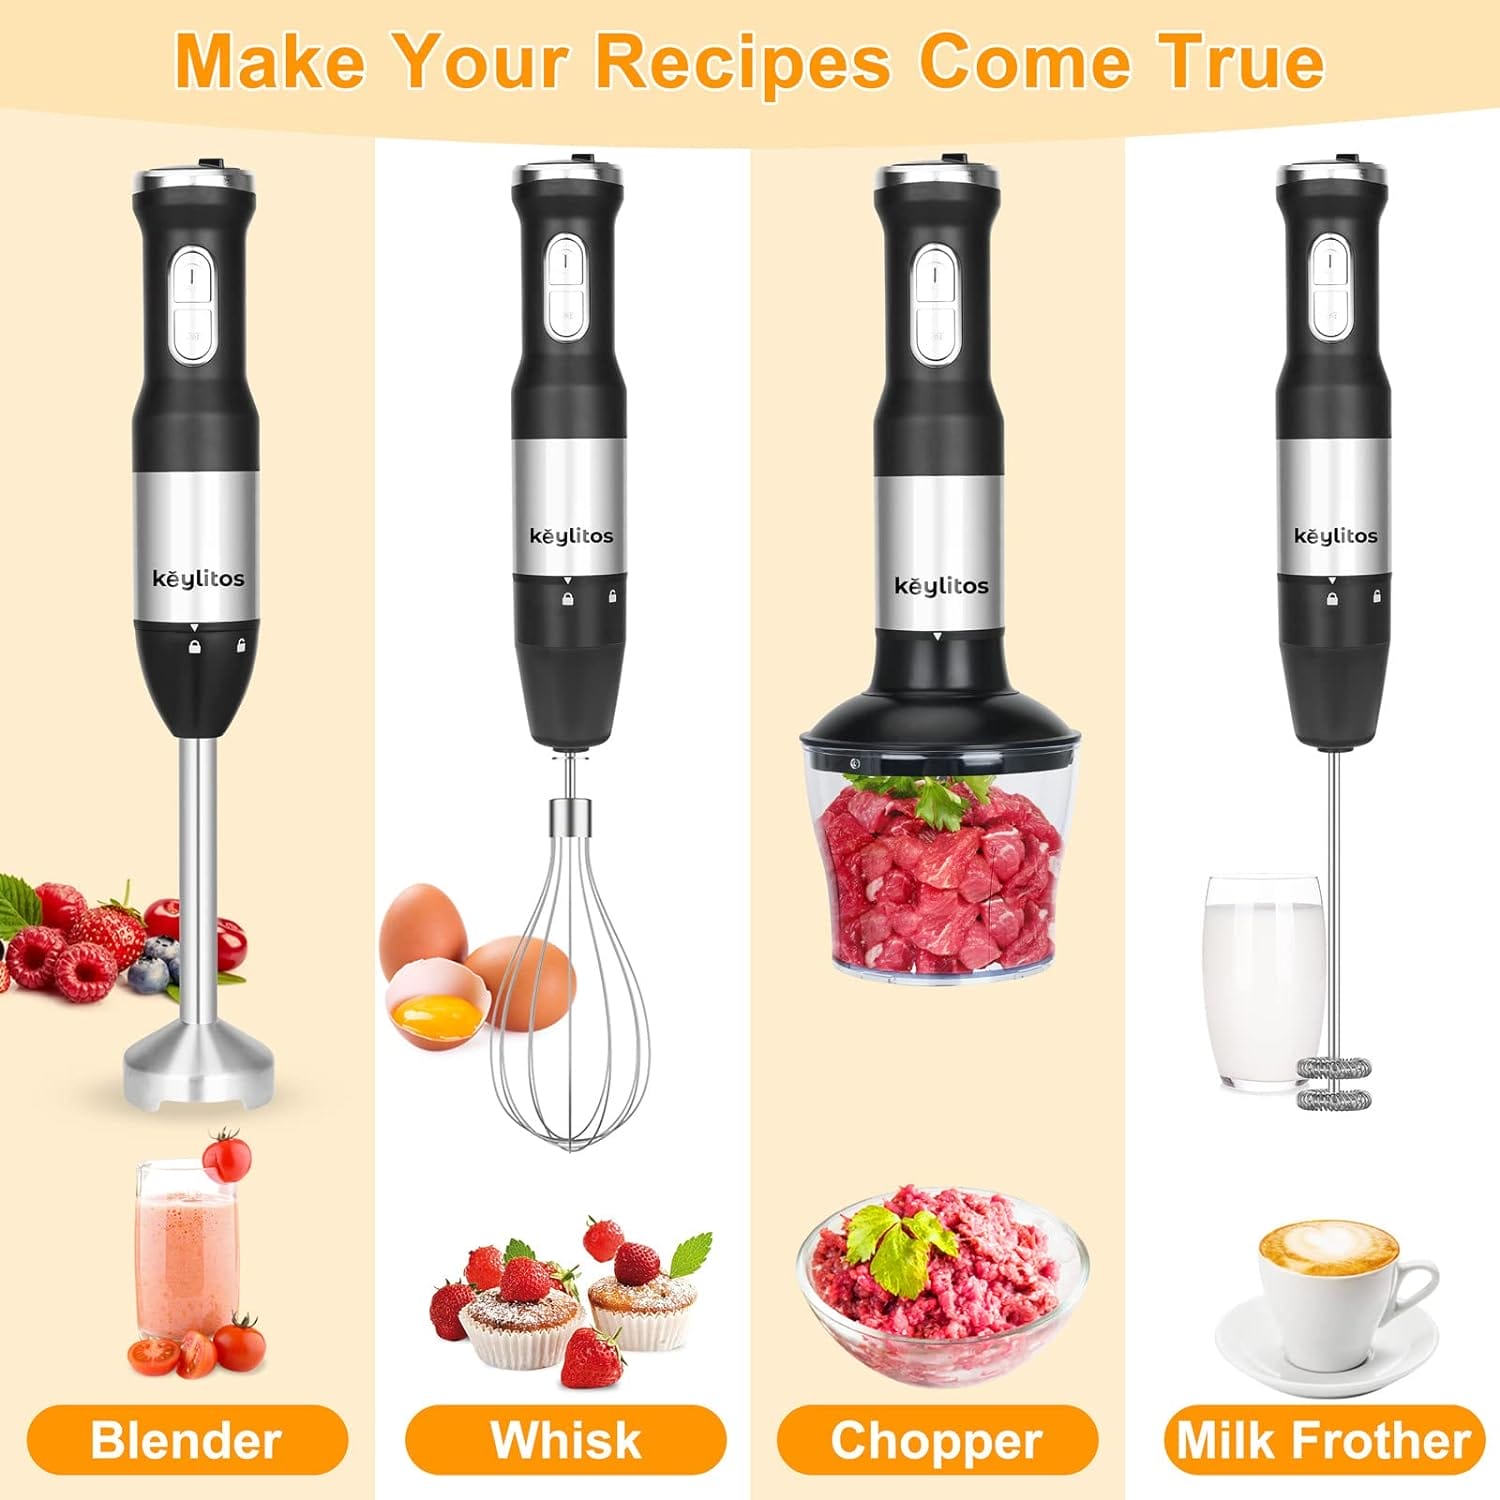 Keylitos 5 in 1 Immersion Hand Blender Mixer, [Upgraded]1000W Handheld Stick Blender with 800ML Beaker,600ML Chopper,Whisk and Milk Frother for Smoothie,Baby Food,Sauces Red,Puree,Soup